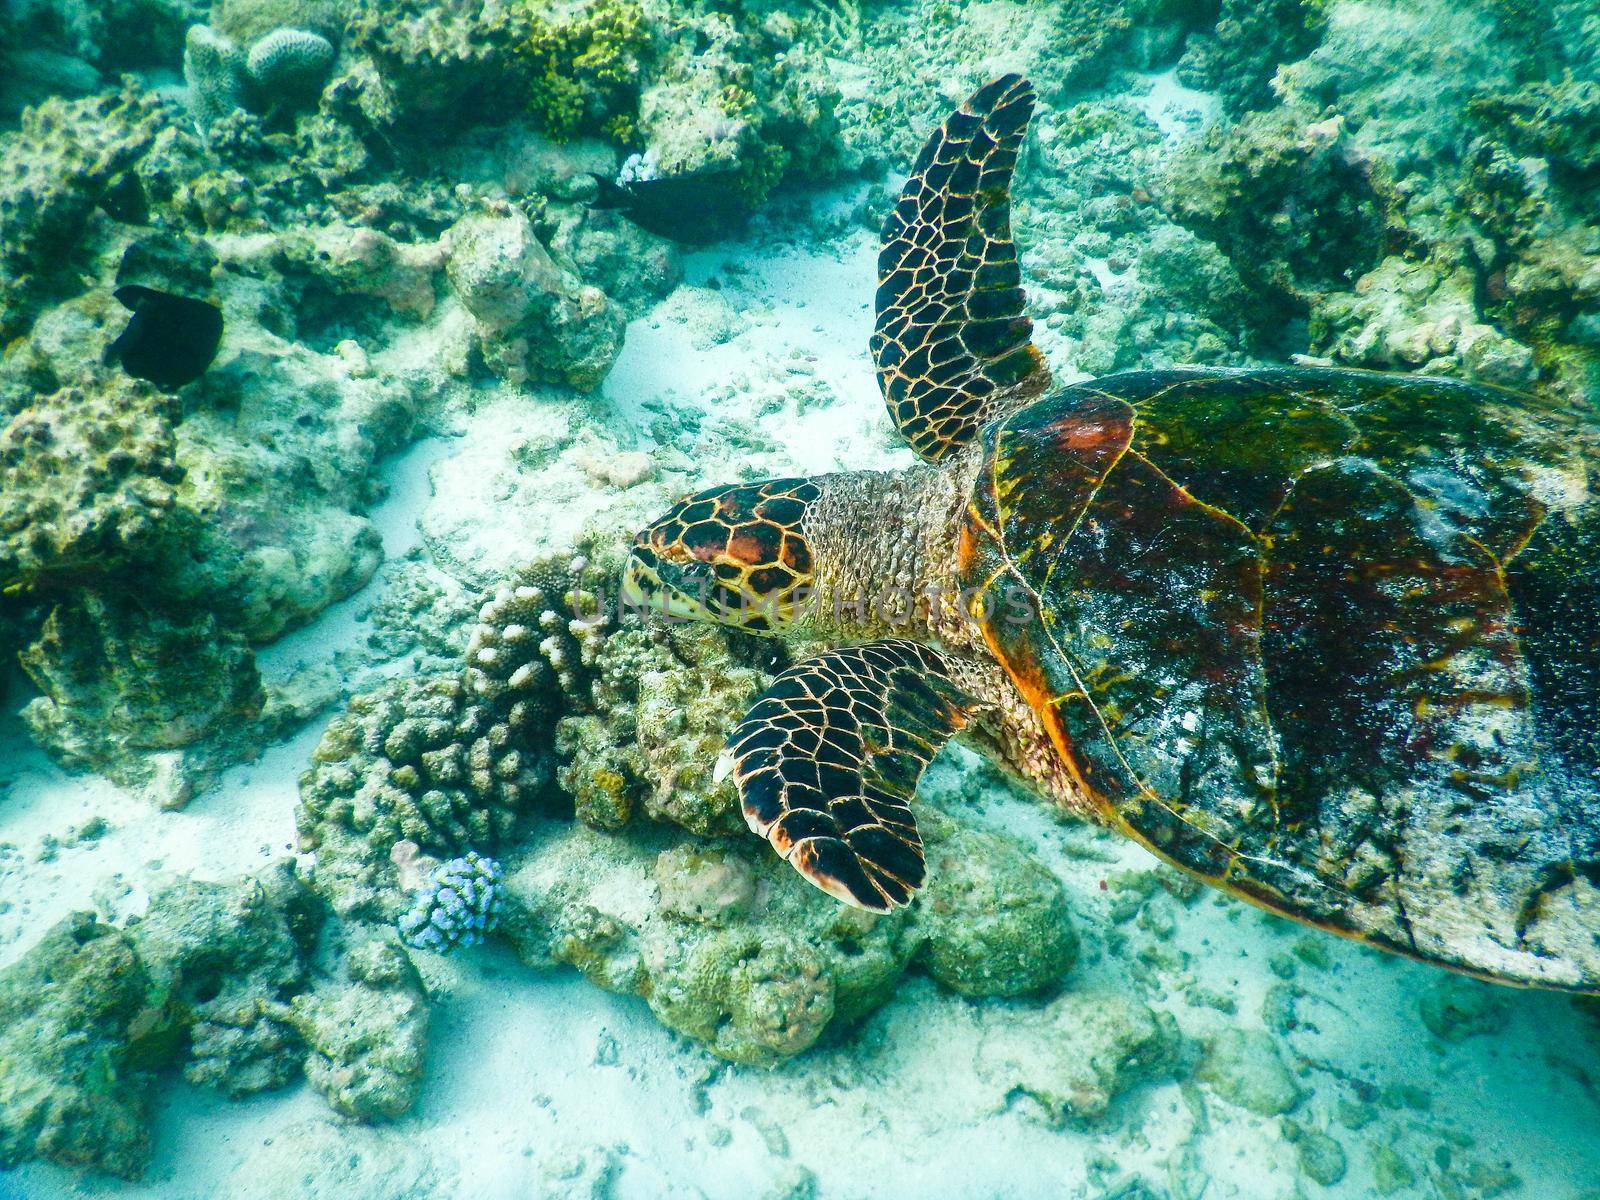 sea turtle on the Maldivian coral reef that swims among placid and peaceful plankton looking for food